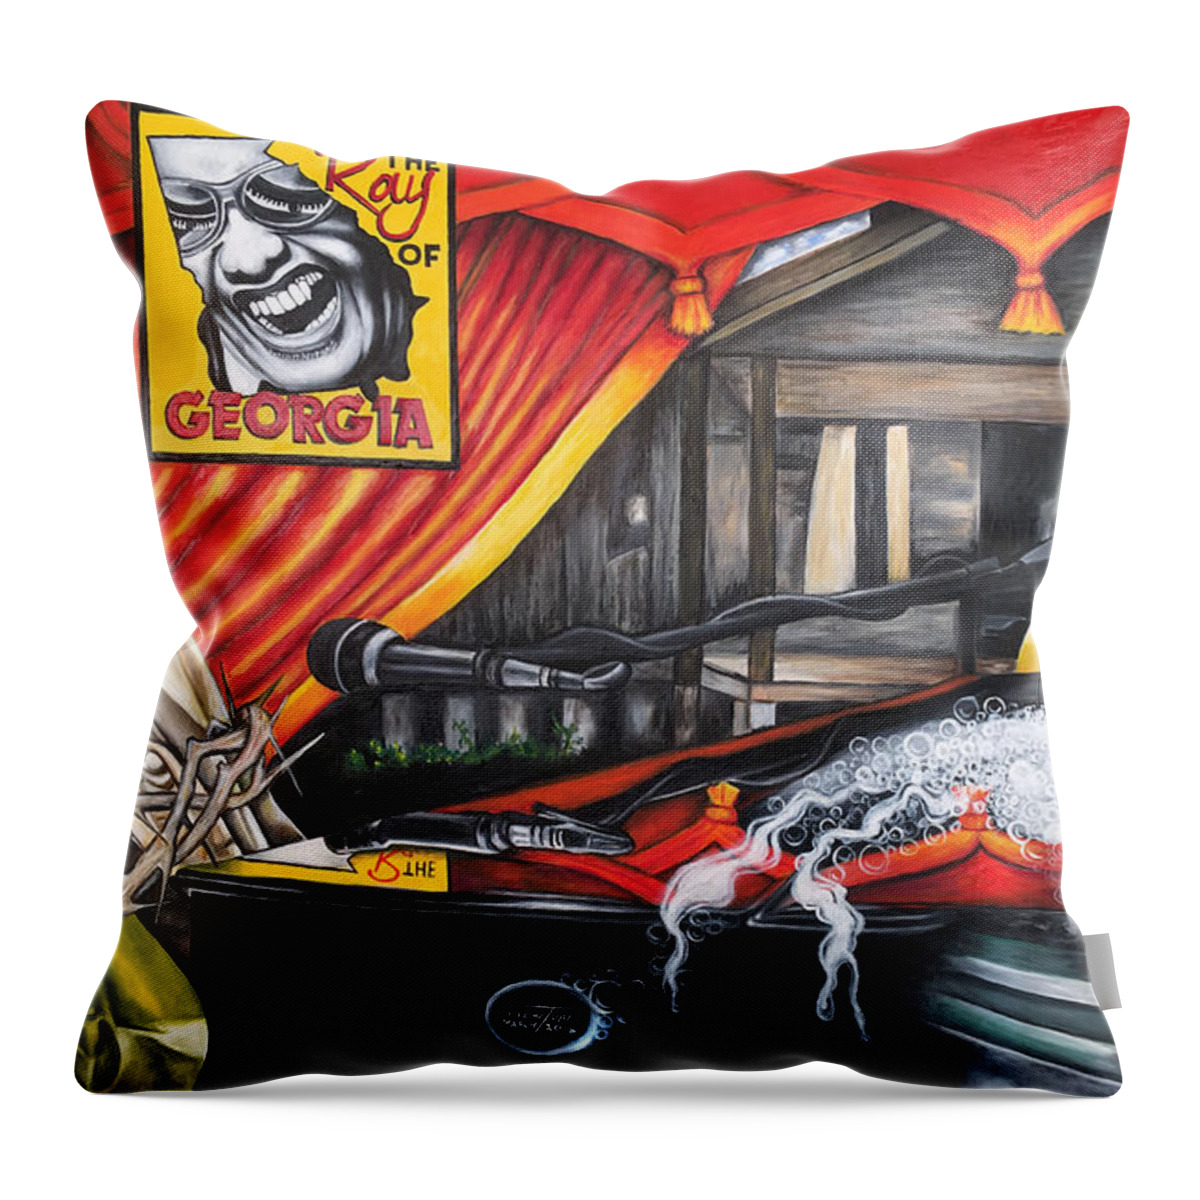 Addiction Throw Pillow featuring the painting The Ray of Georgia Unchained My Hands by O Yemi Tubi